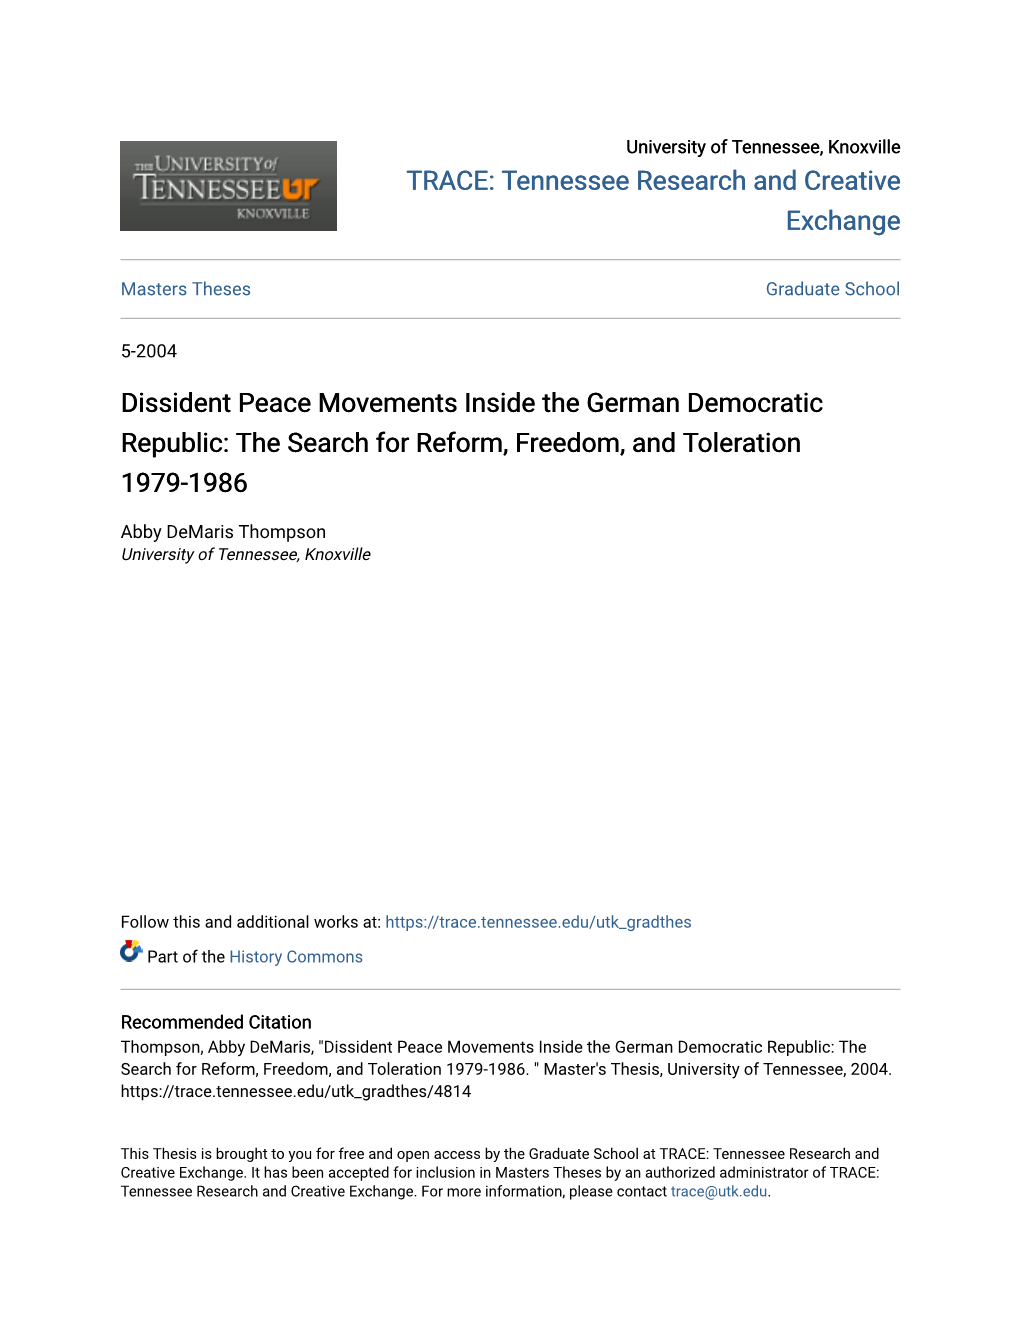 Dissident Peace Movements Inside the German Democratic Republic: the Search for Reform, Freedom, and Toleration 1979-1986